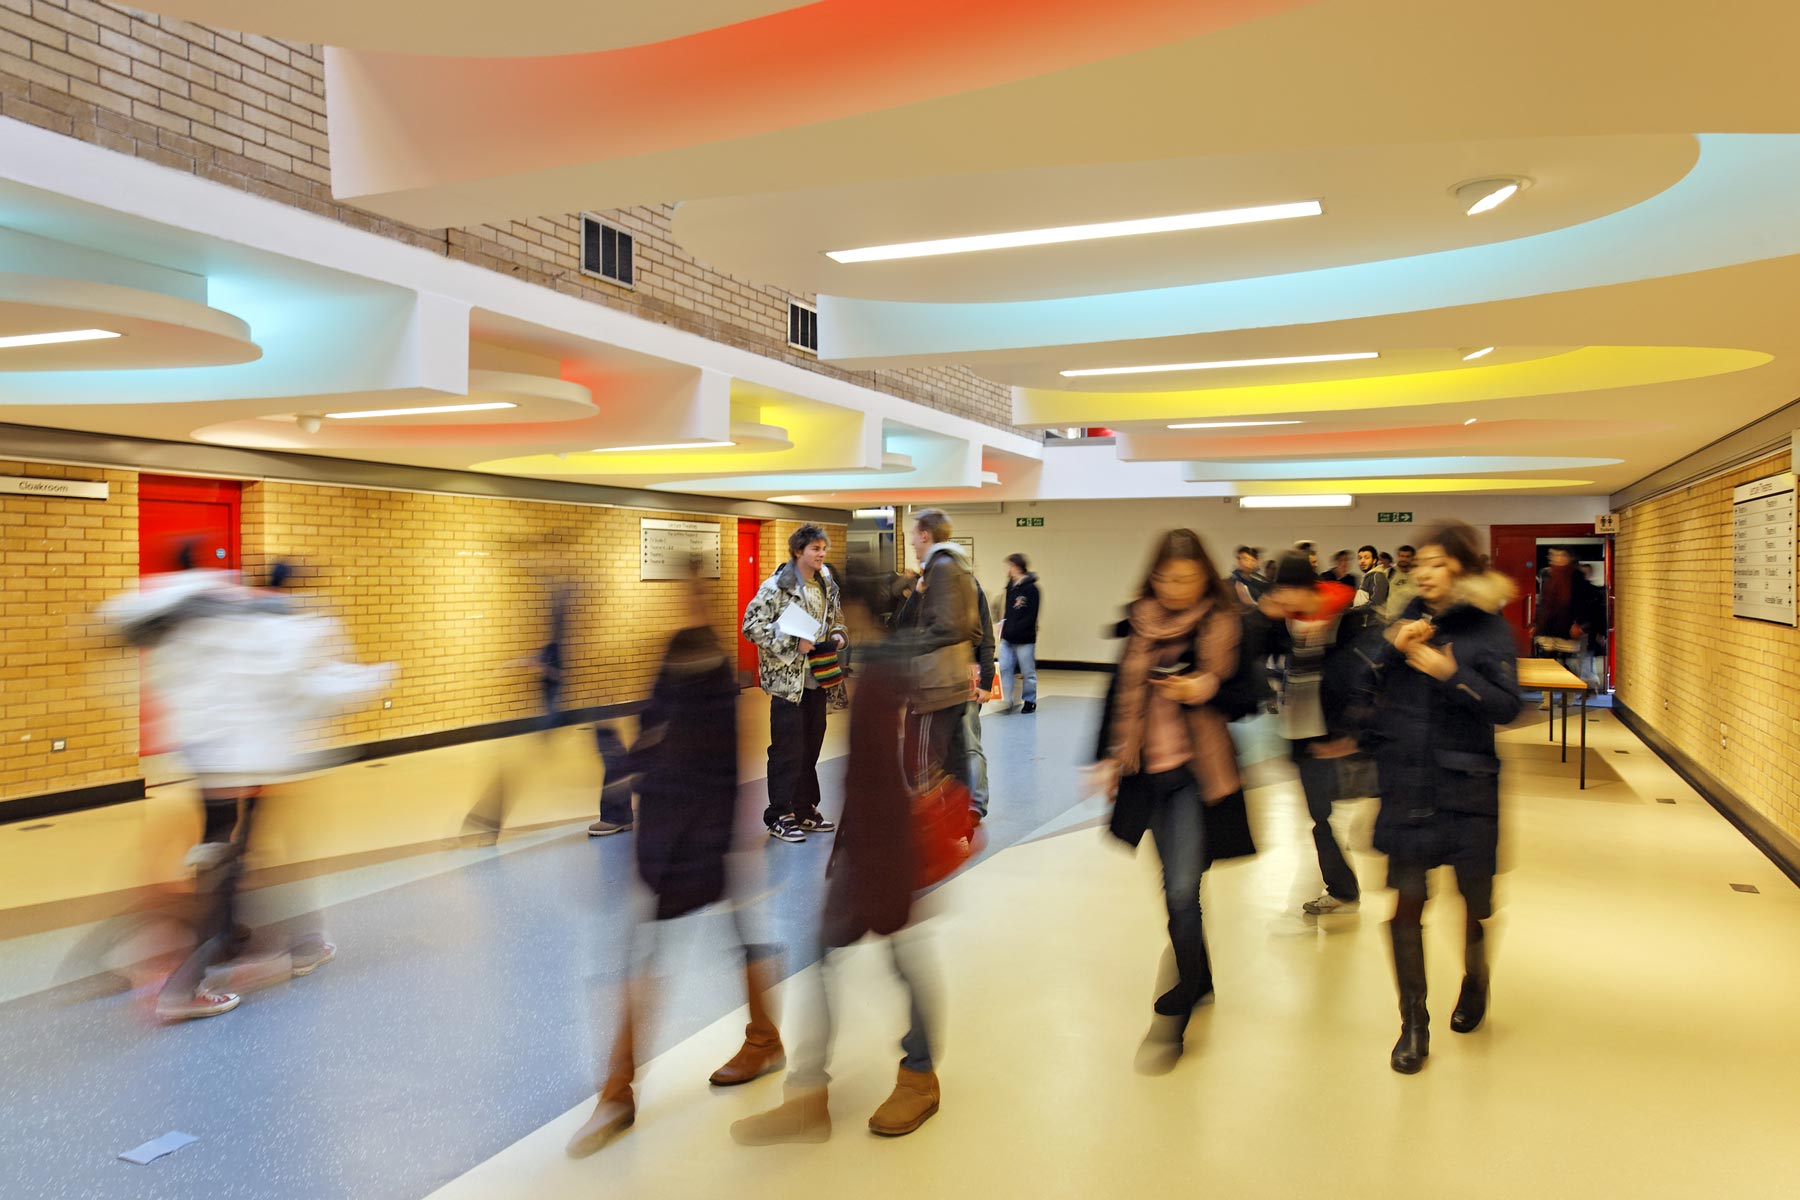 The University of Surrey - Upgraded and rationalised circulation spaces with coloured indirect lighting